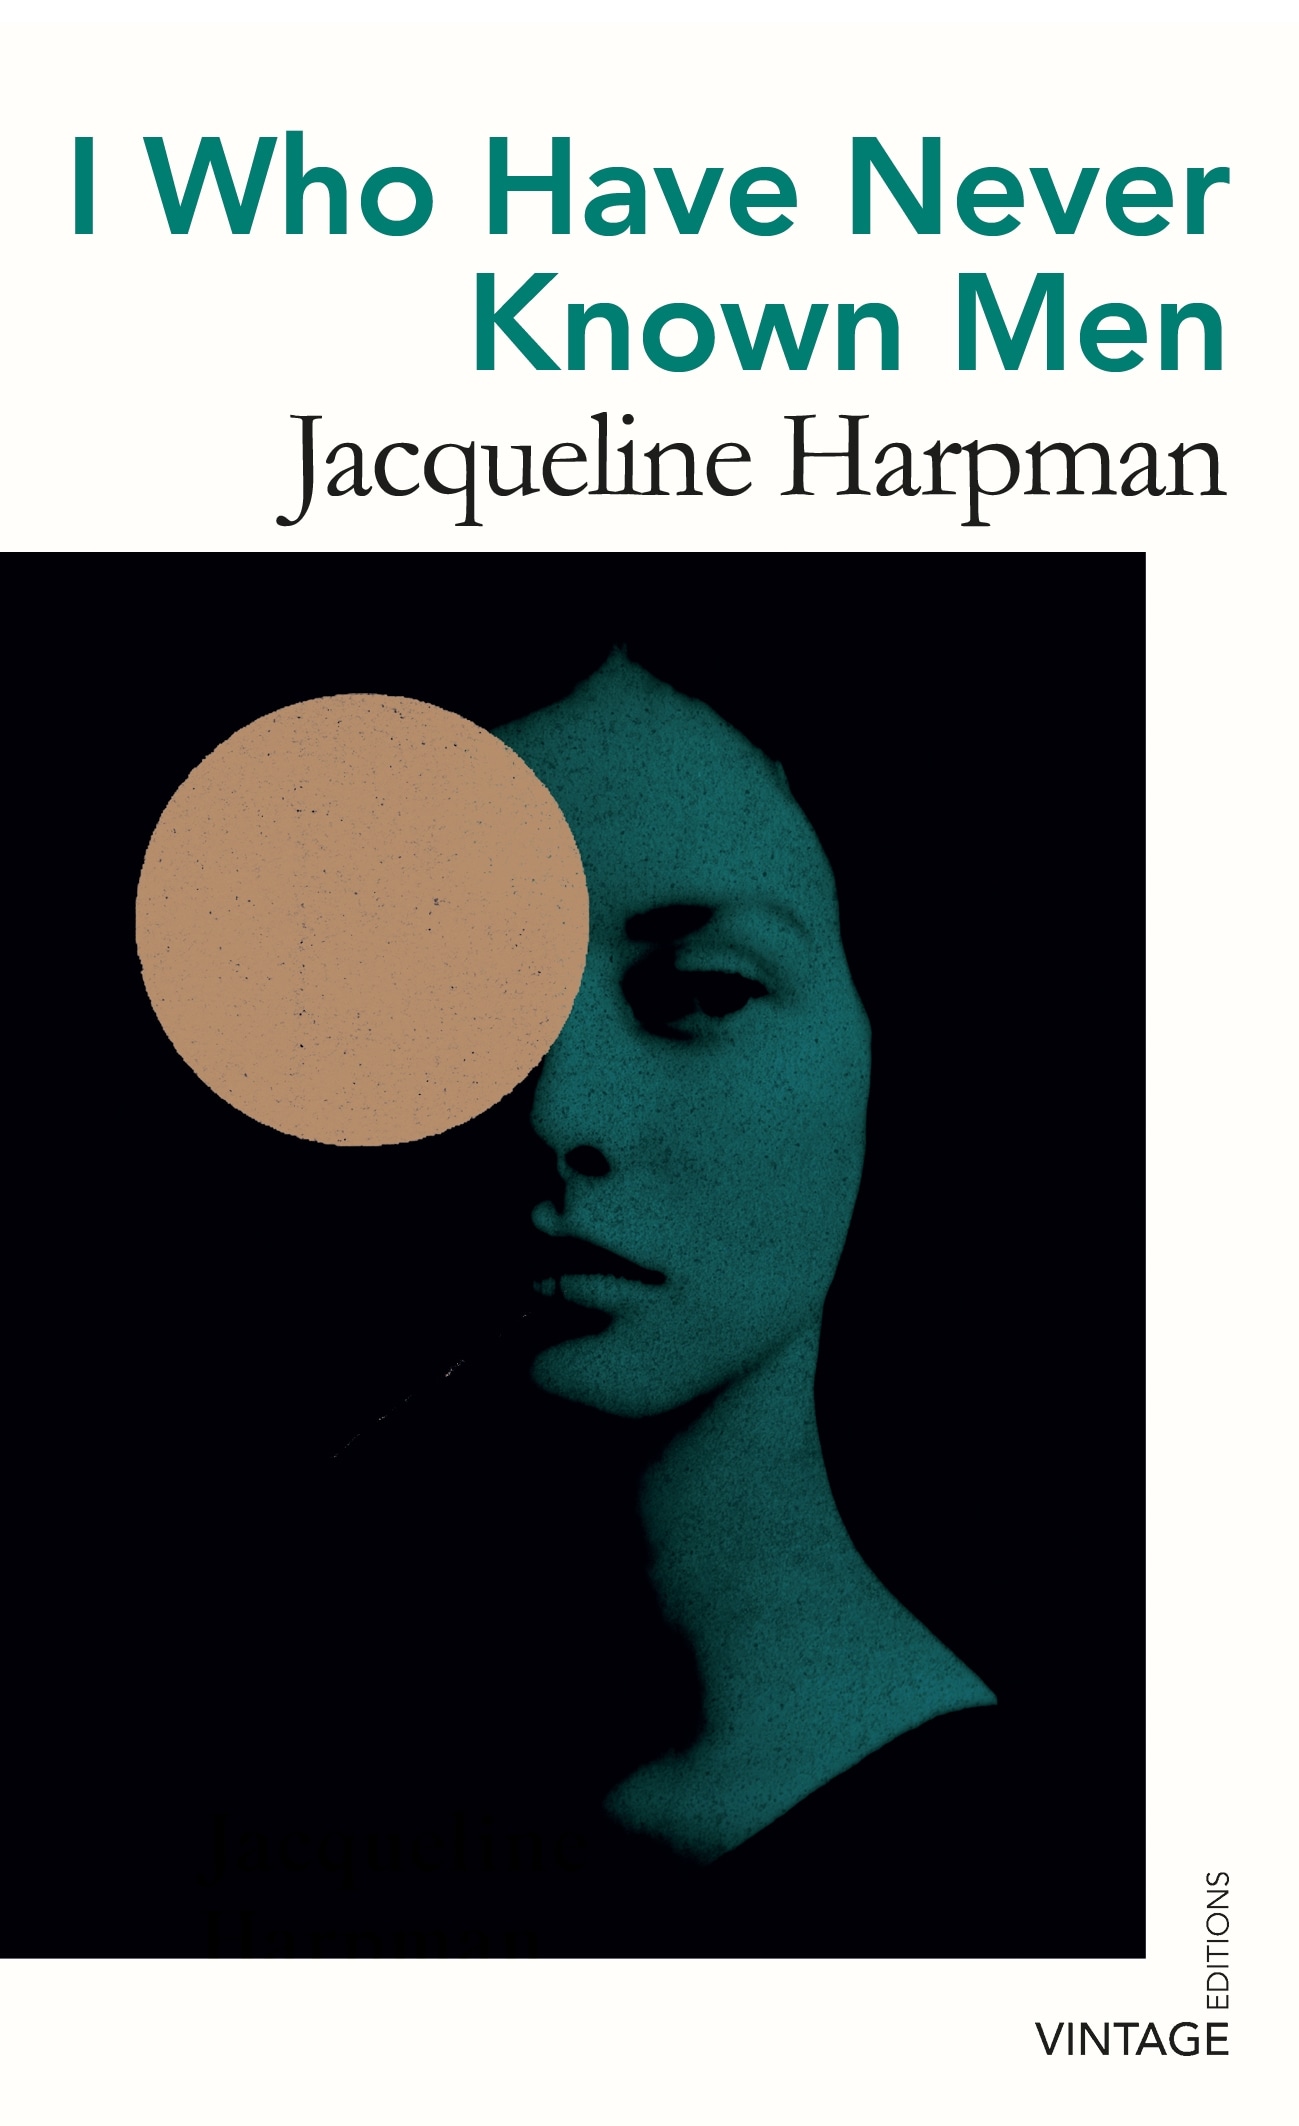 Book “I Who Have Never Known Men” by Jacqueline Harpman — June 3, 2021